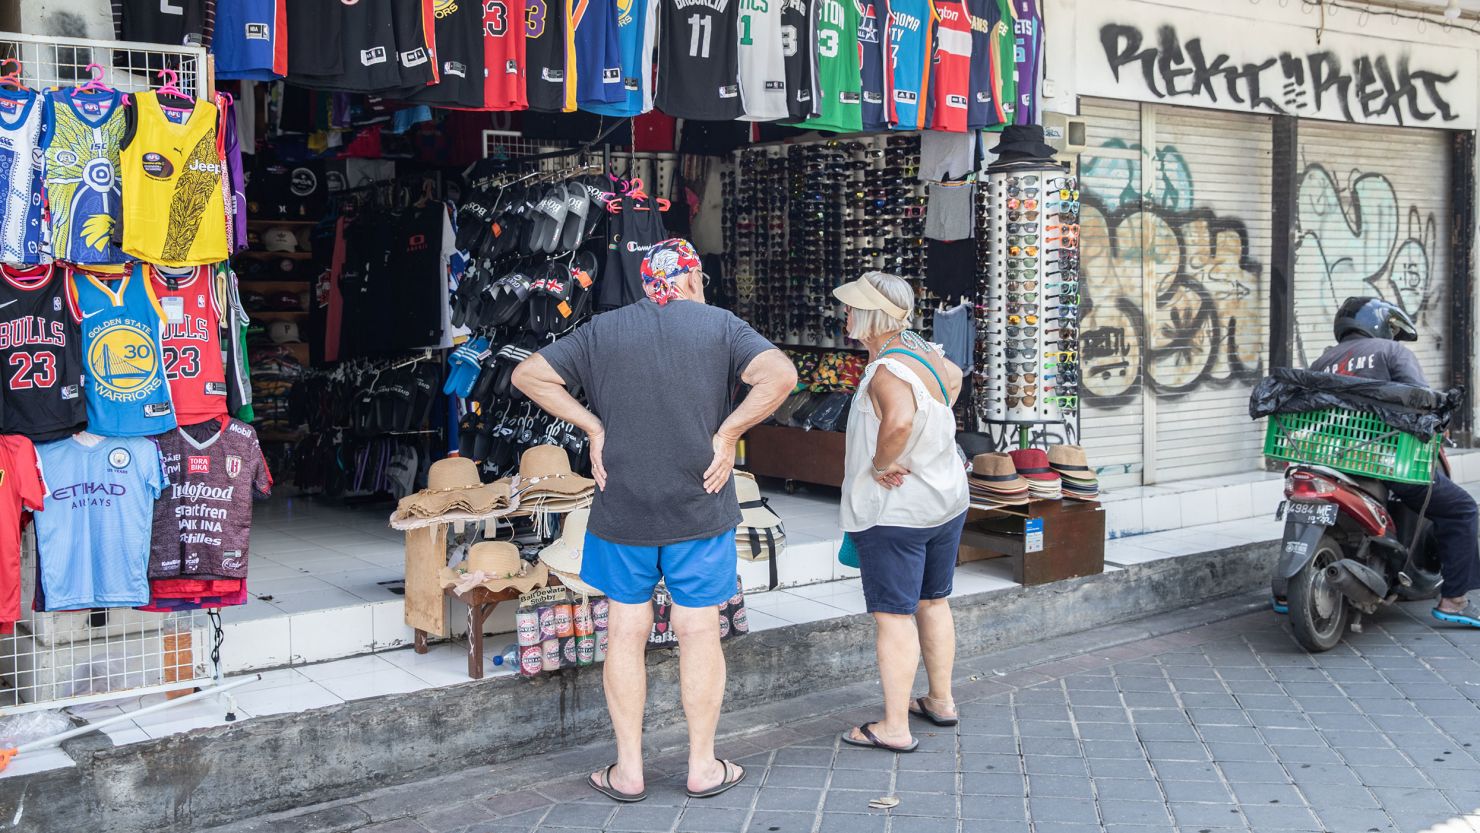 Tourists outside a store in Kuta, Bali, Indonesia, on Friday, May 6, 2022.